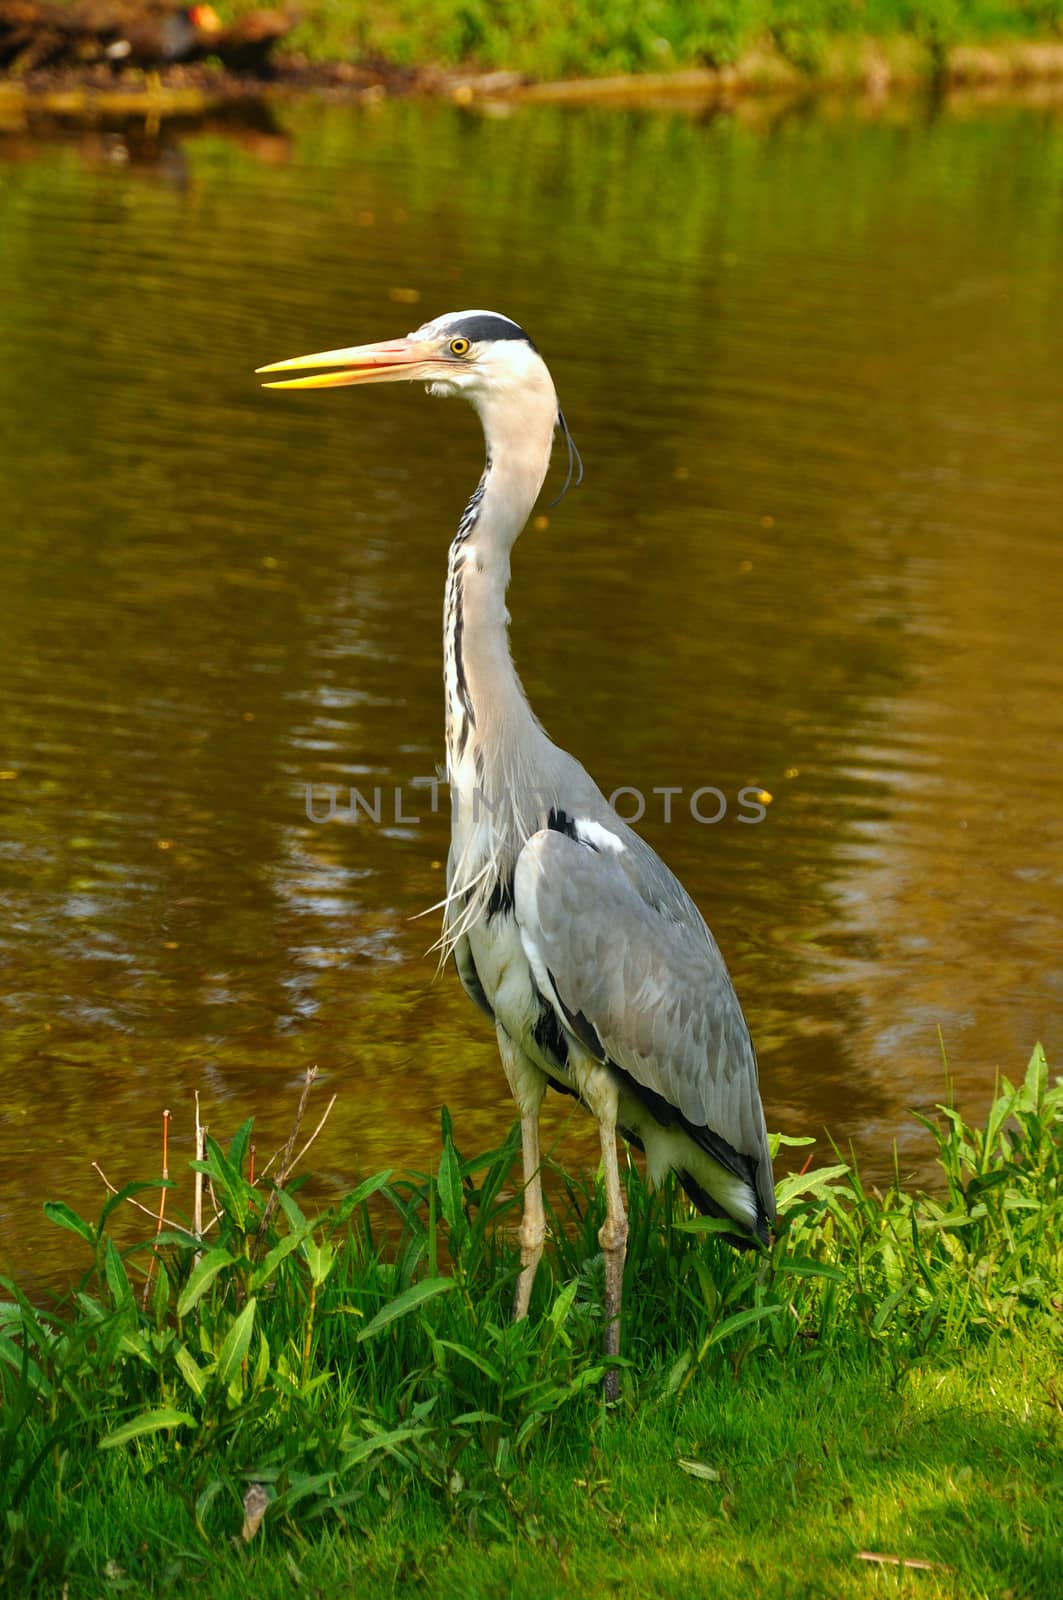 Great blue standing heron in the park near the lake on a sunny d by Eagle2308